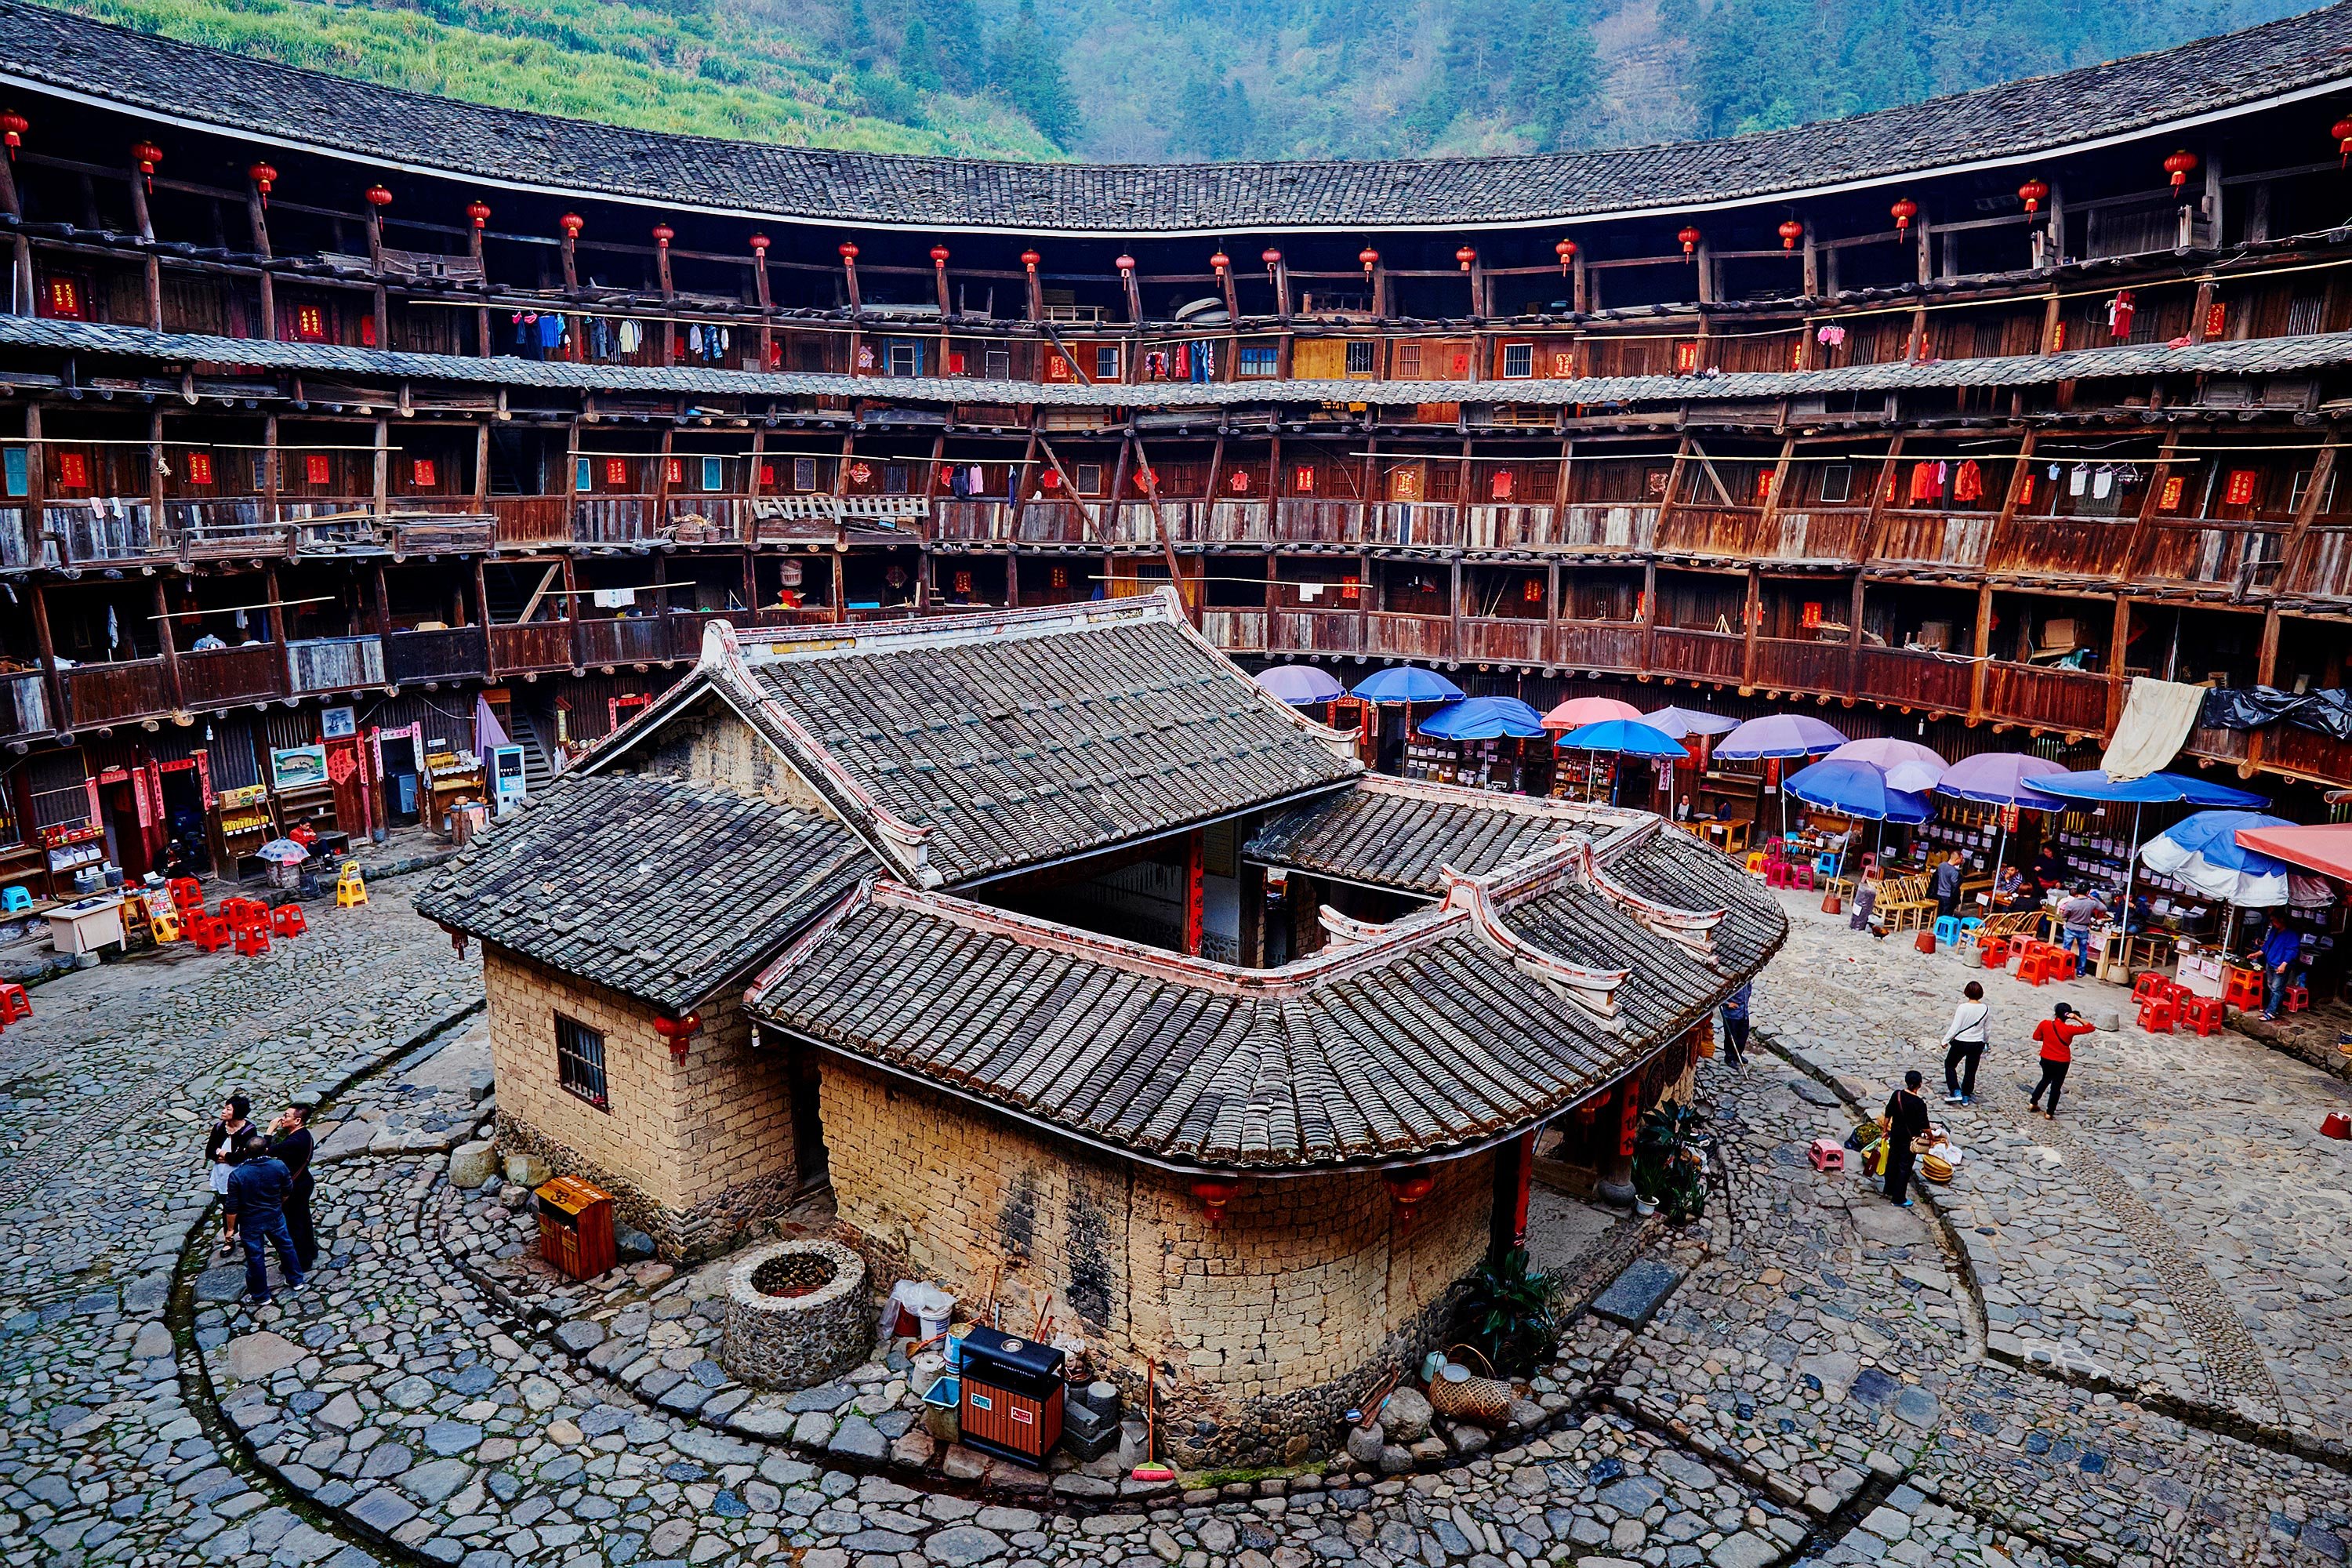 cultural heritage tourism in china